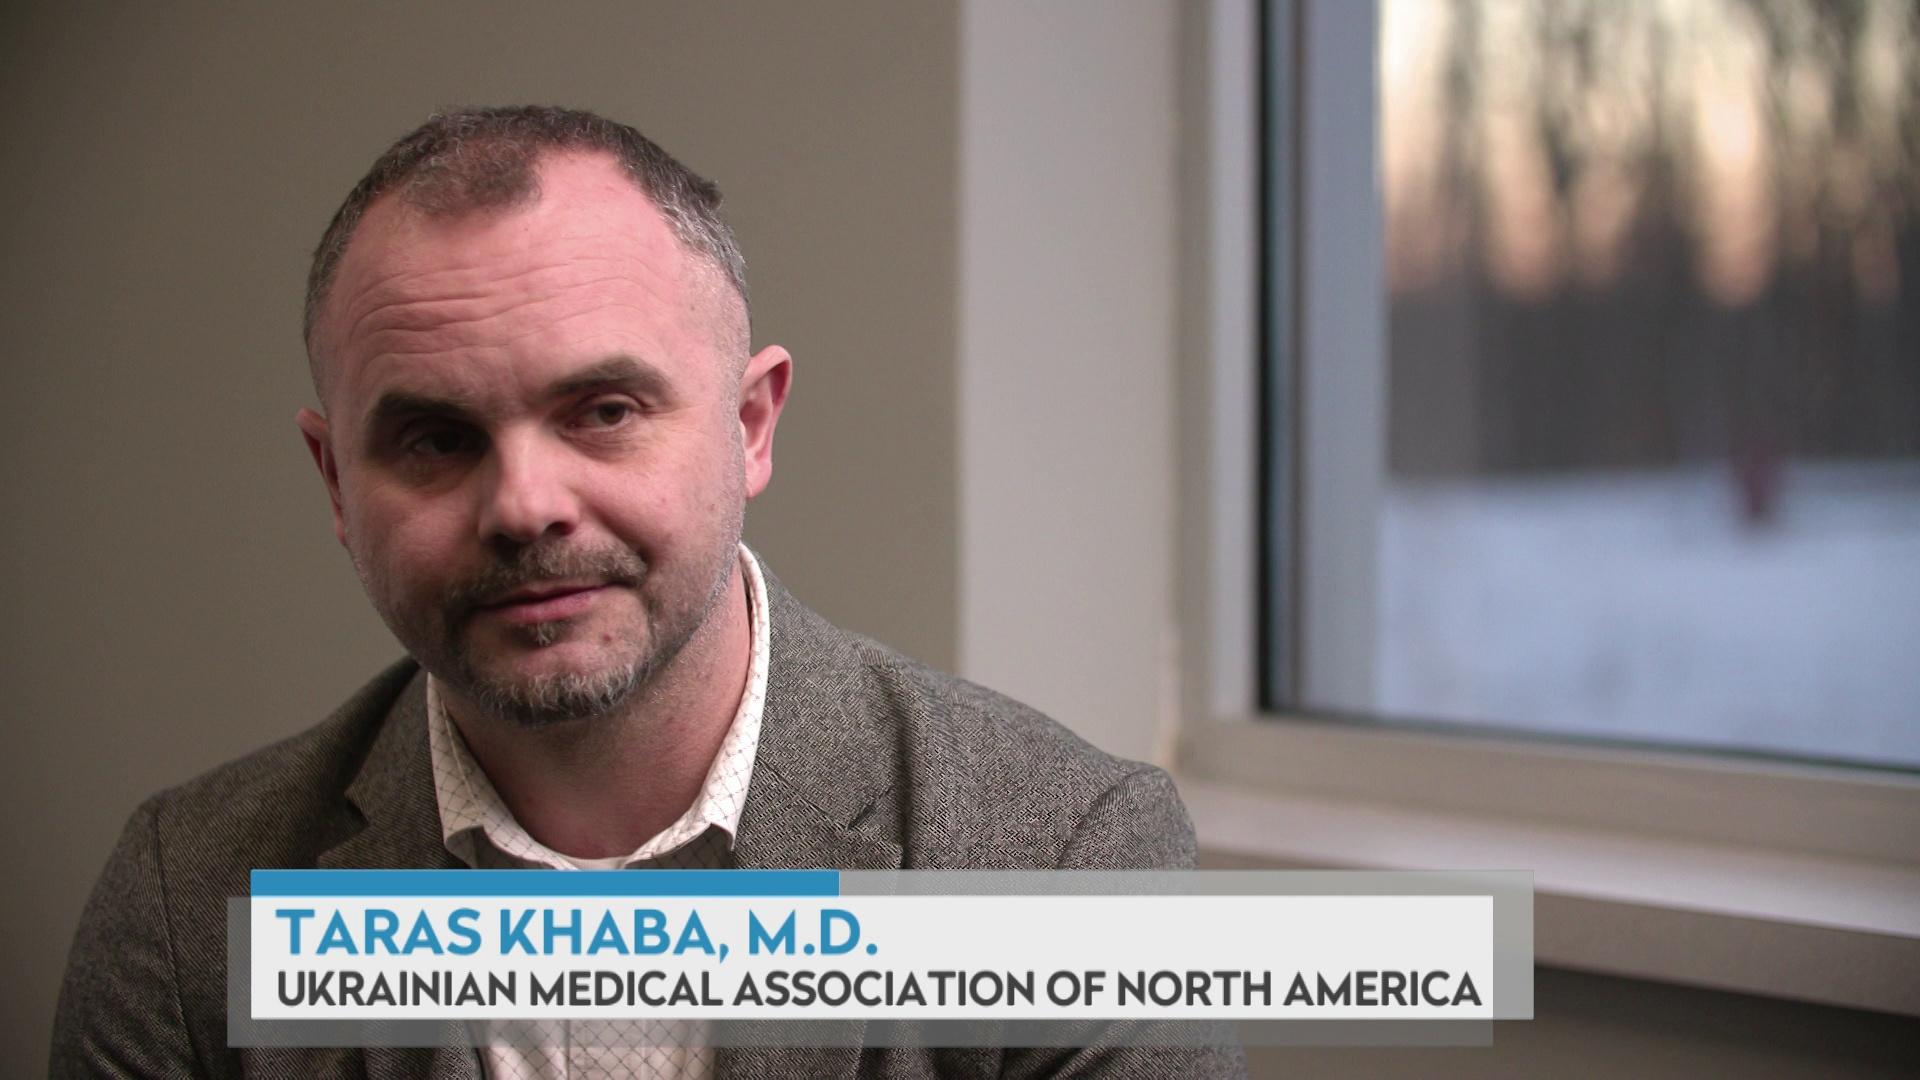 A still image from a video shows Taras Khaba sitting in a room with a window behind his left shoulder, with a graphic at bottom reading 'Taras Khaba, M.D.' and 'Ukrainian Medical Association of North America.'